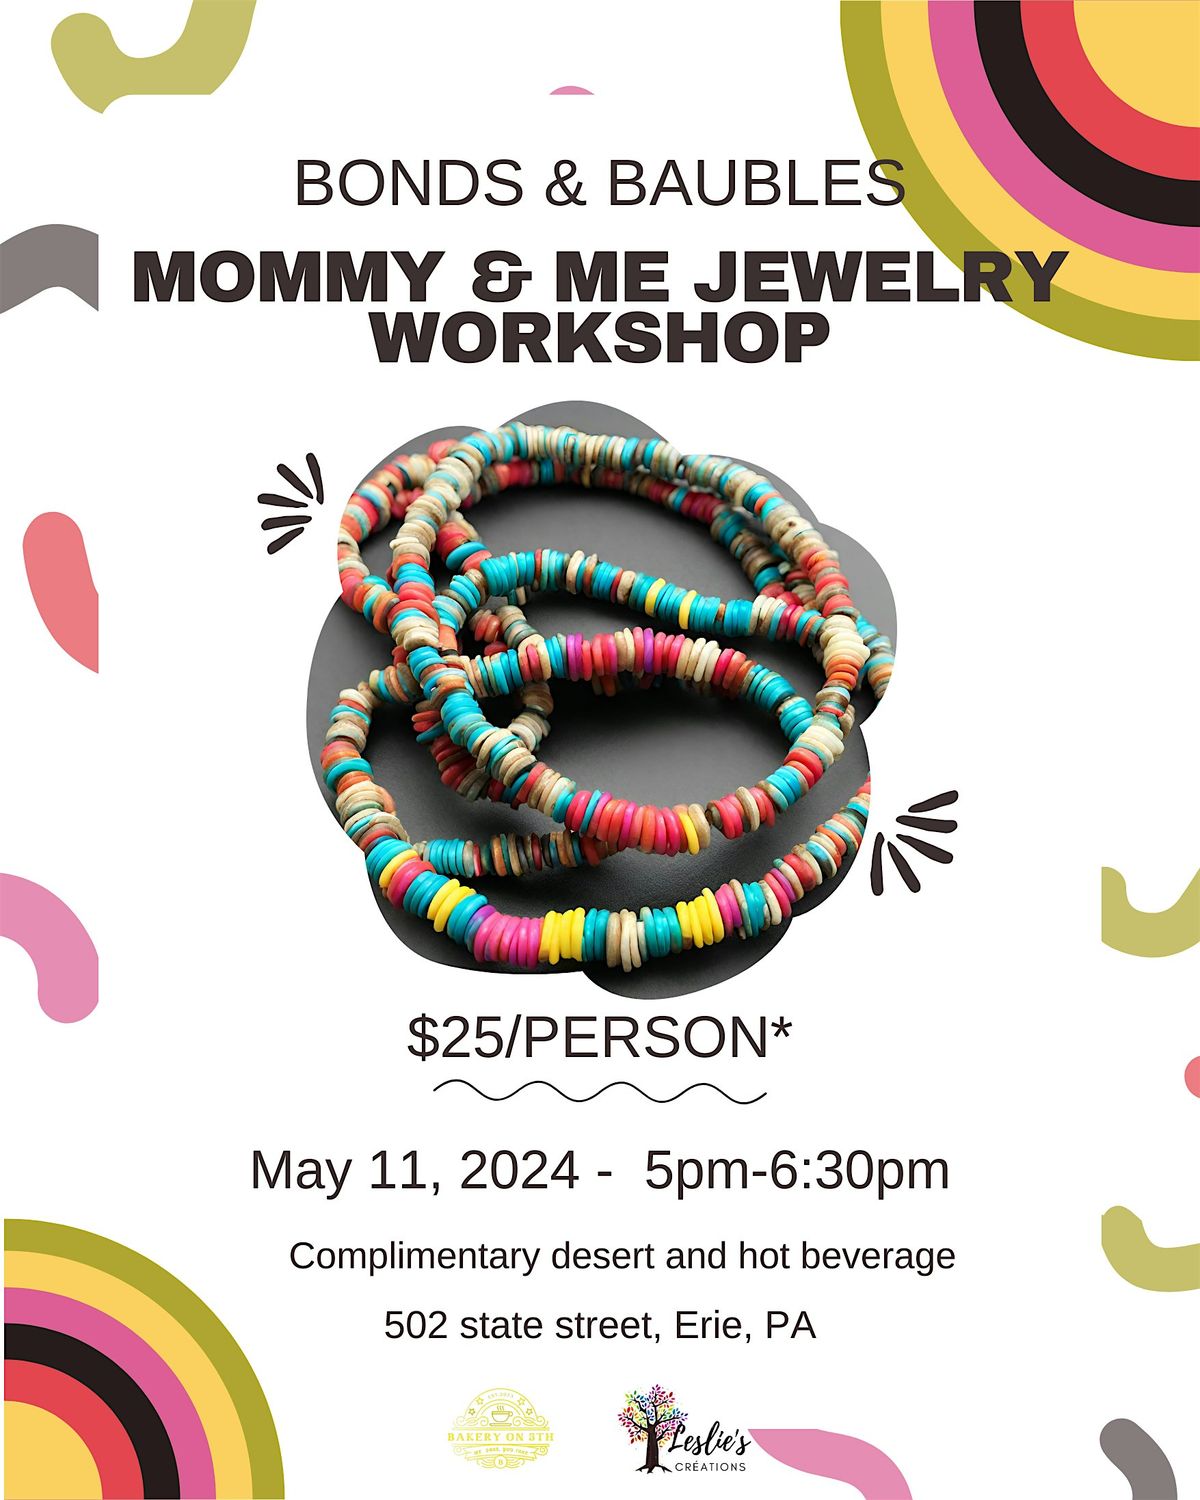 Bonds and Baubles: Mommy and Me Jewelry Workshop